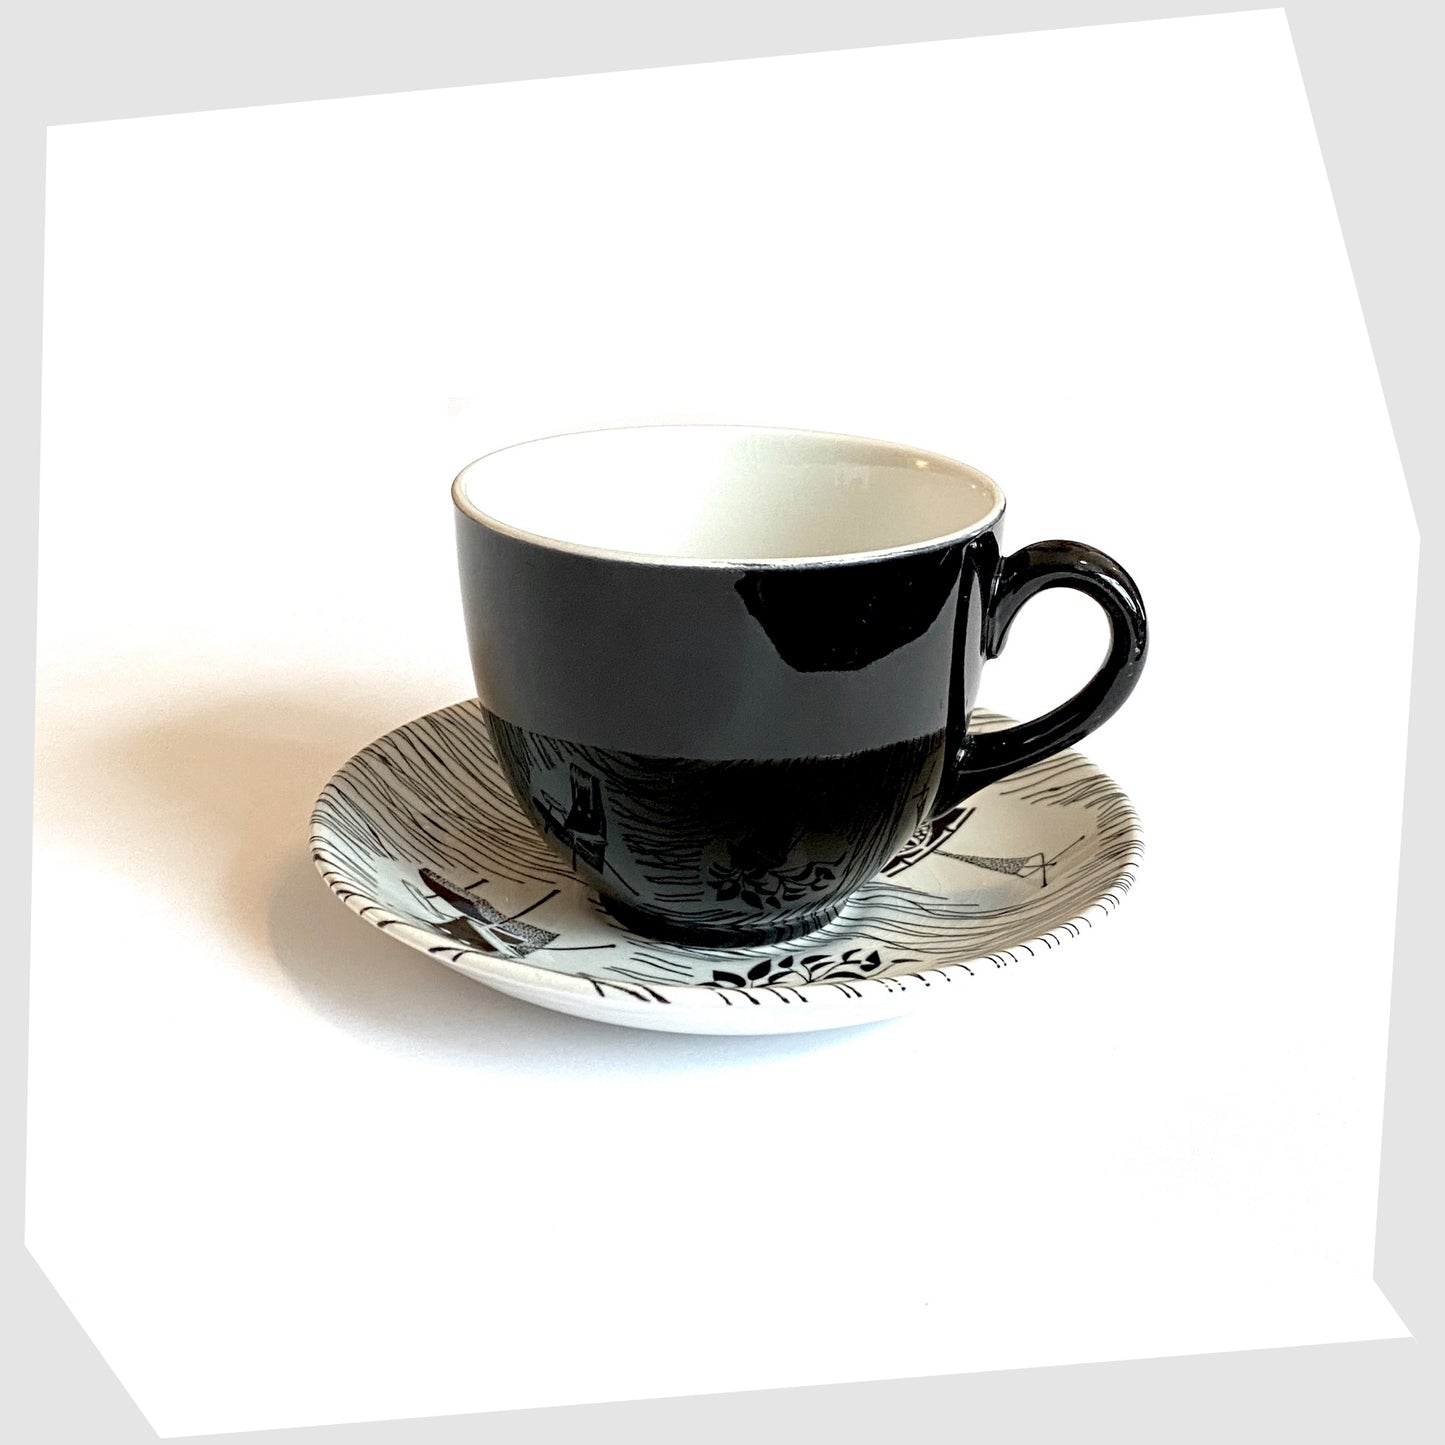 ridgway-homemaker-cup-and-saucer-set-designed-by-enid-seeney